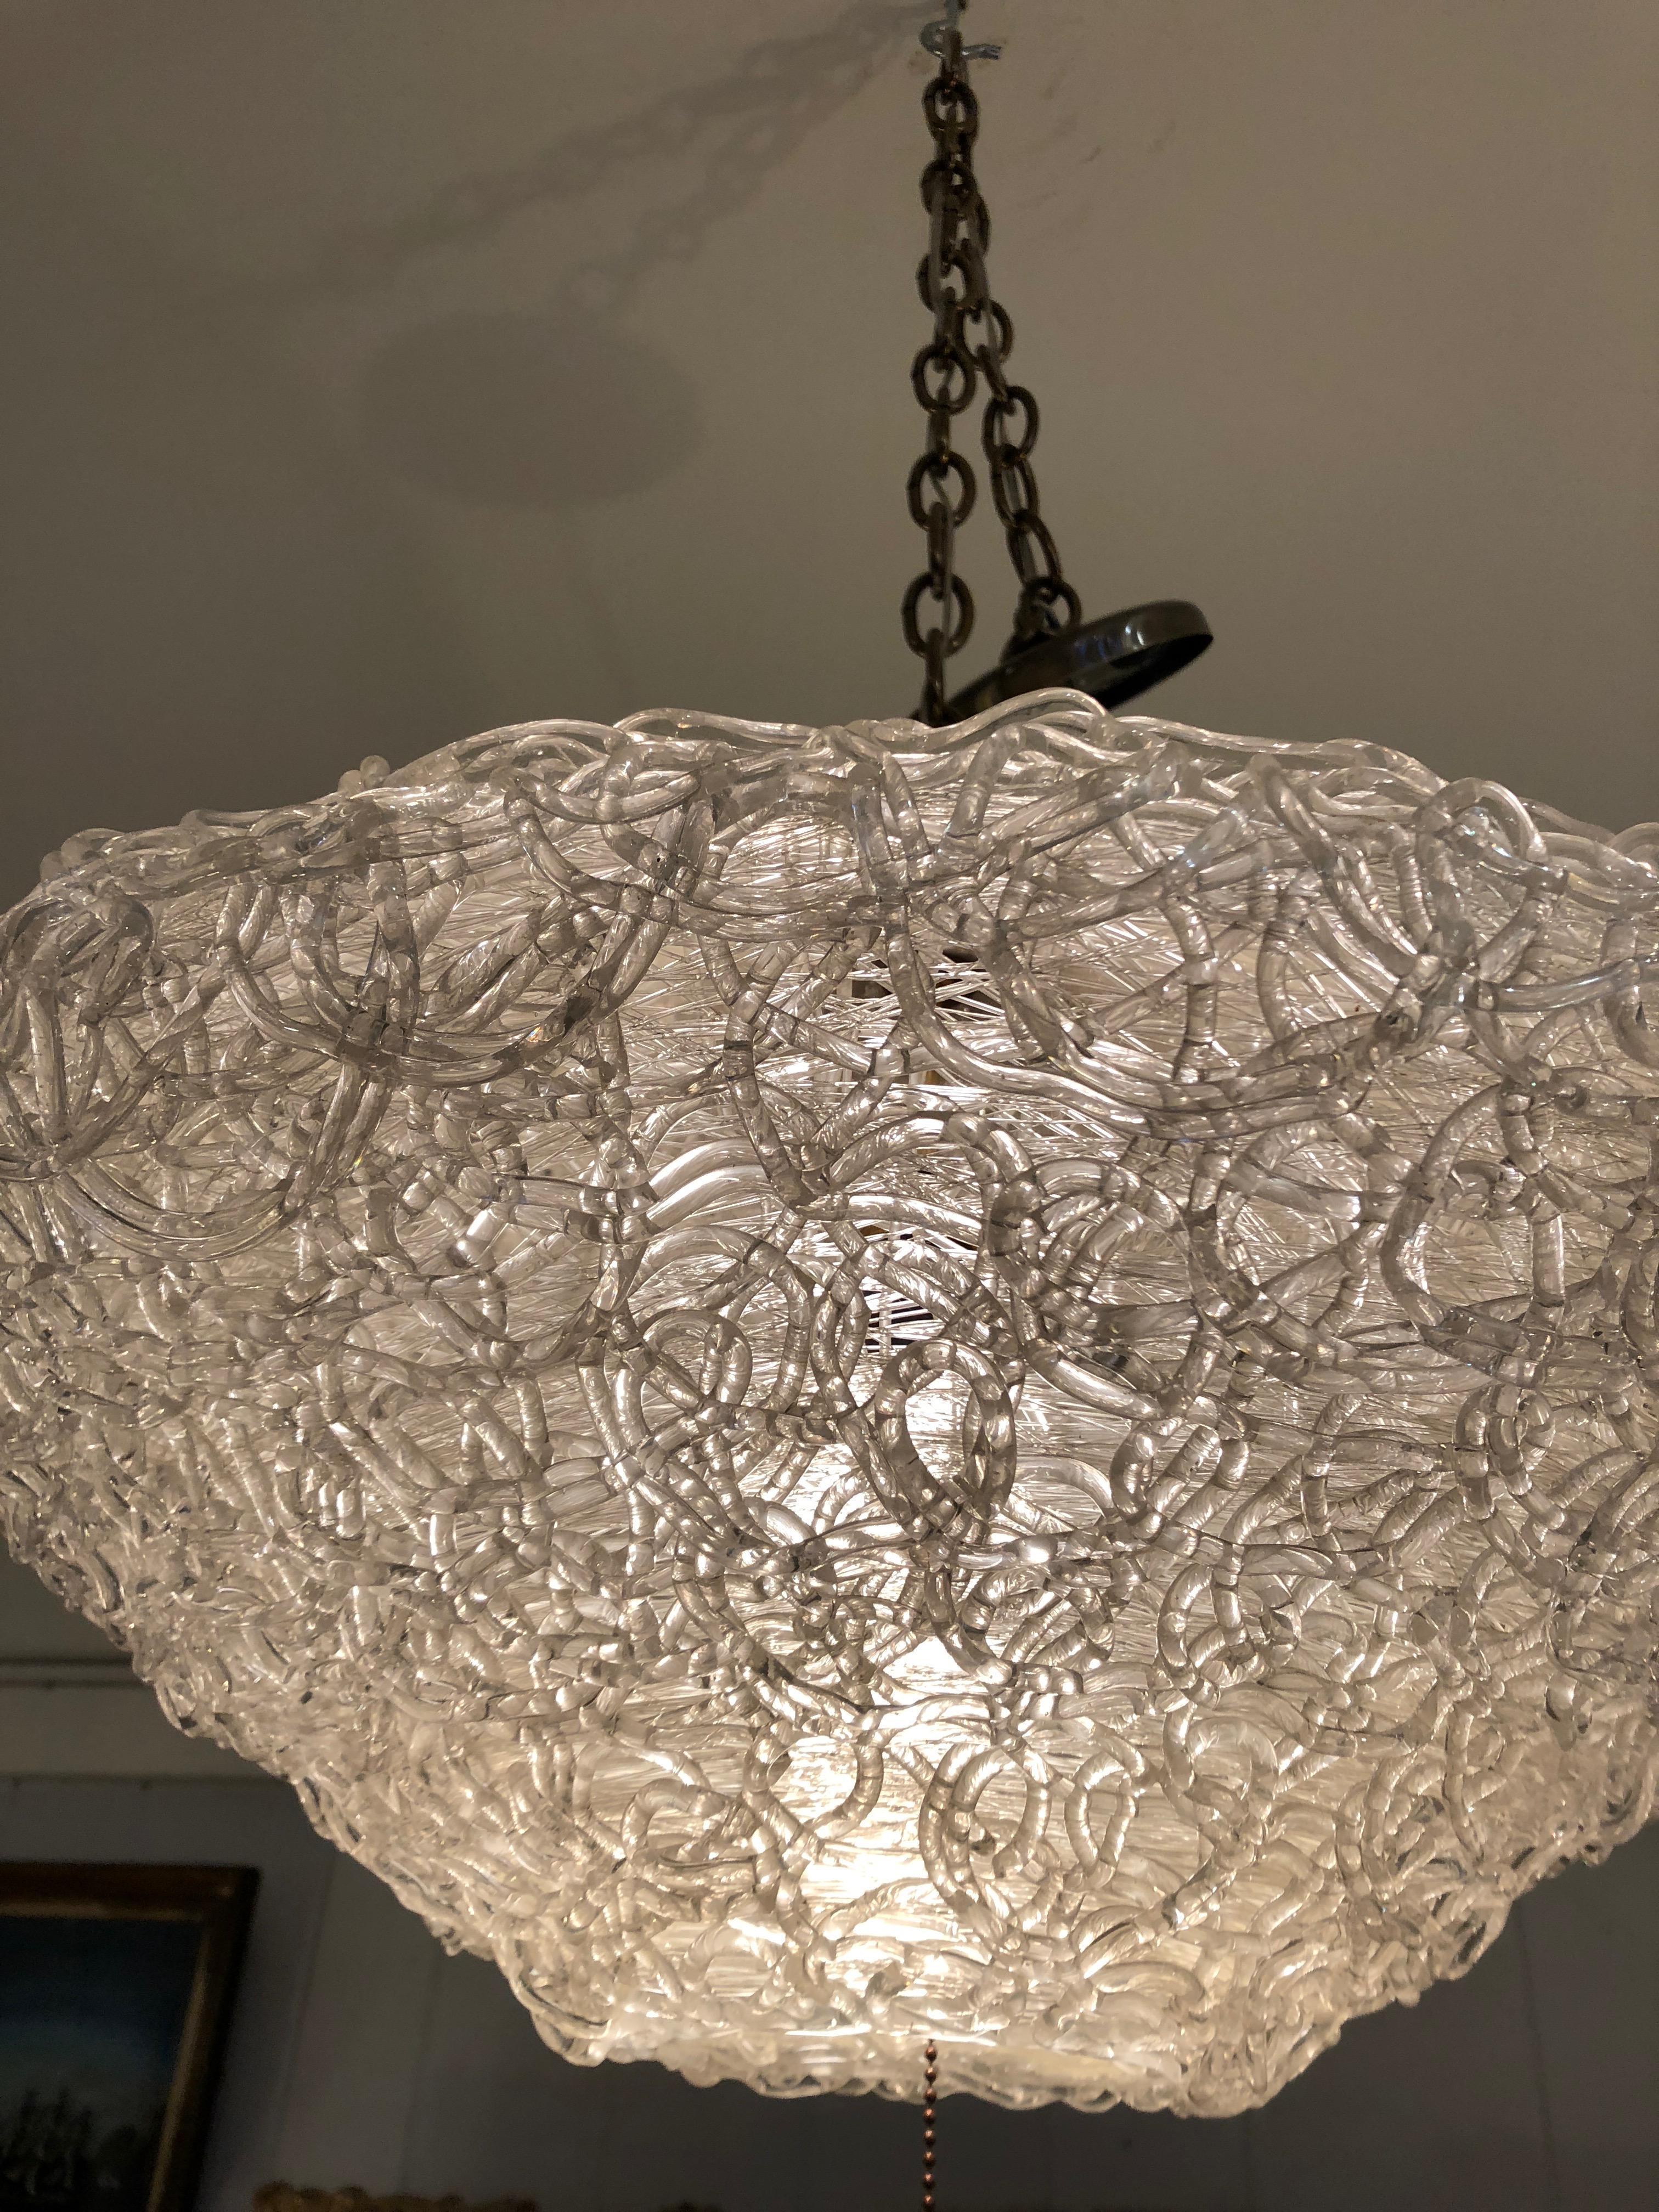 A cool rare find in a Mid-Century Modern light fixture, having a funky saucer shape and made of overlapping strings of glass called spagetti glass for obvious reasons.